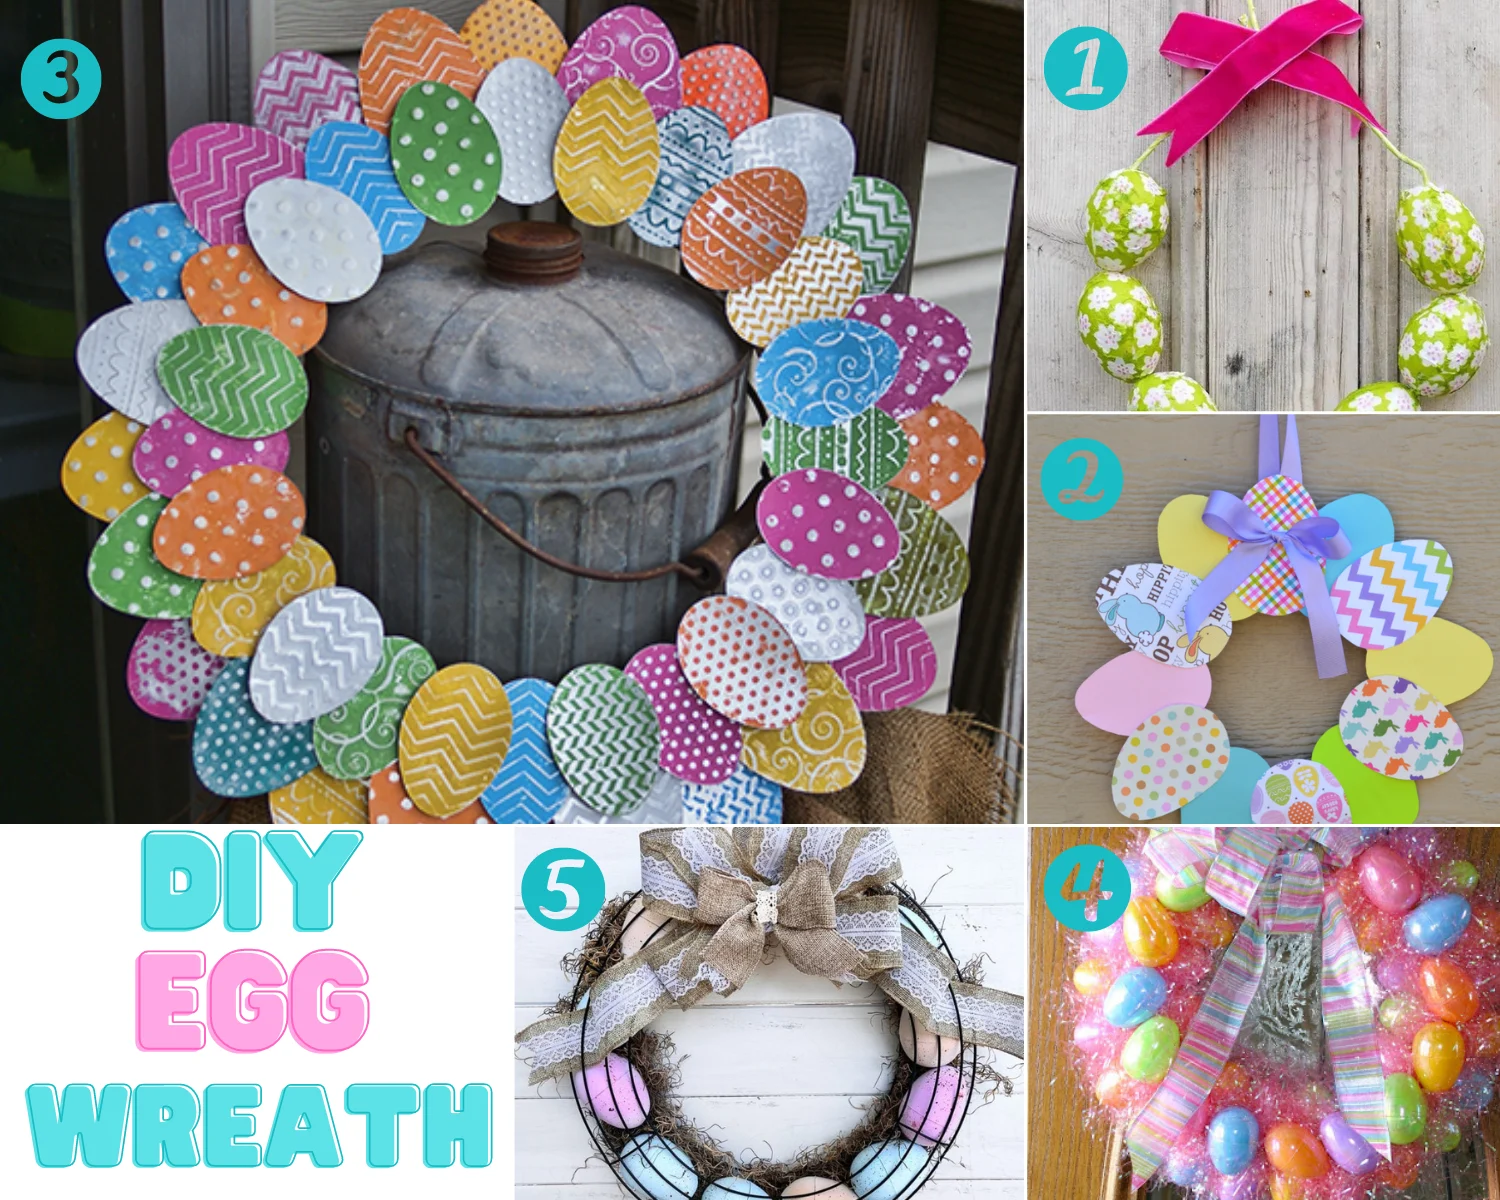 Five egg wreath craft projects from different blogs.